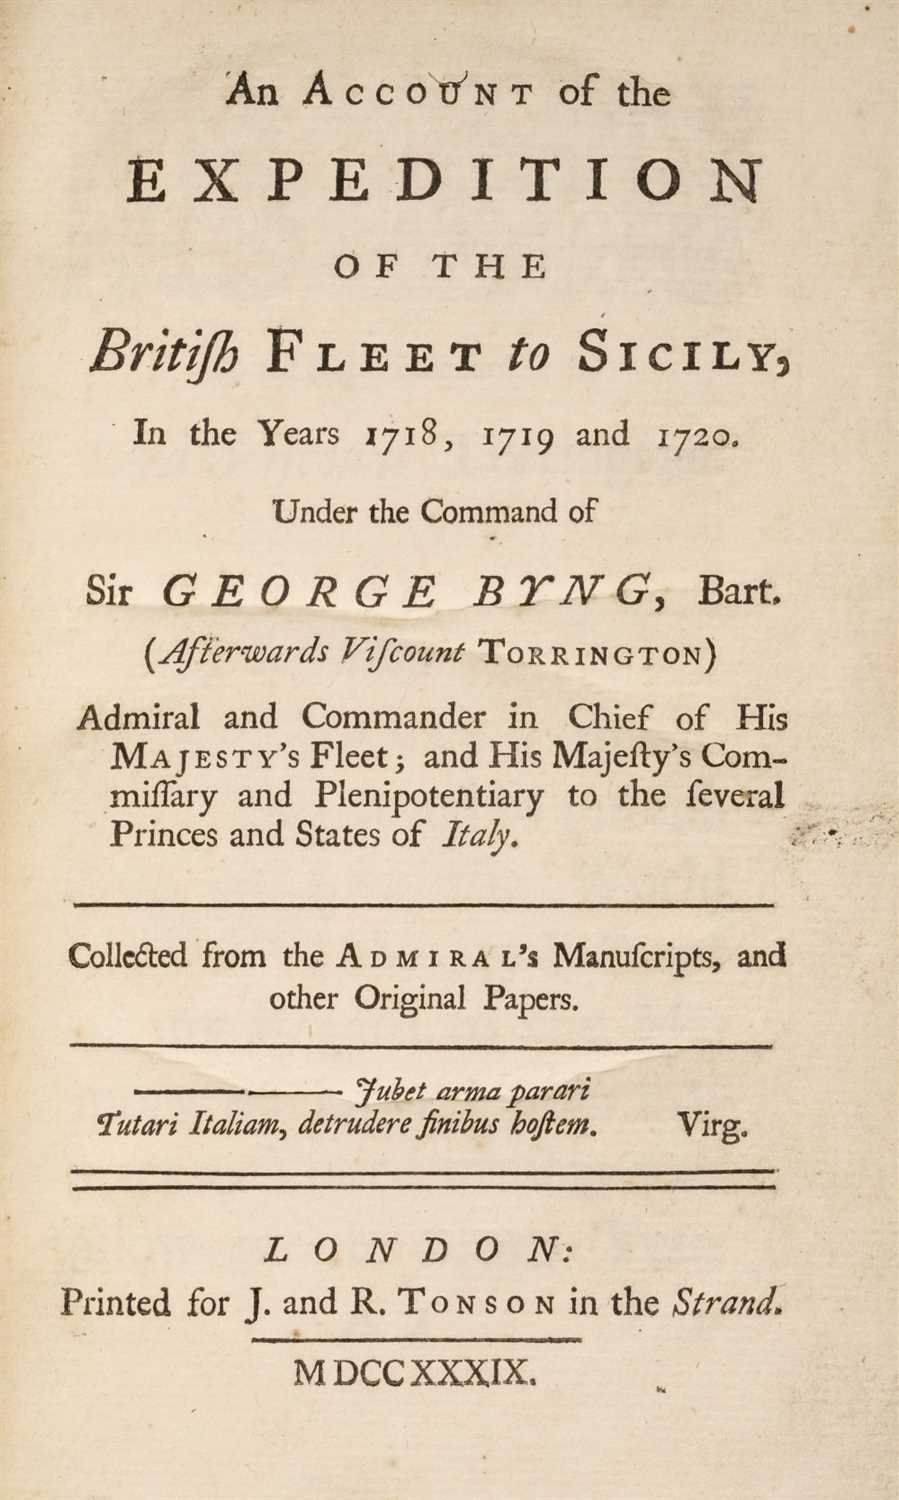 Lot 143 - Corbett (Thomas). An Account of the Expedition of the British Fleet to Sicily..., 1st edition, 1739